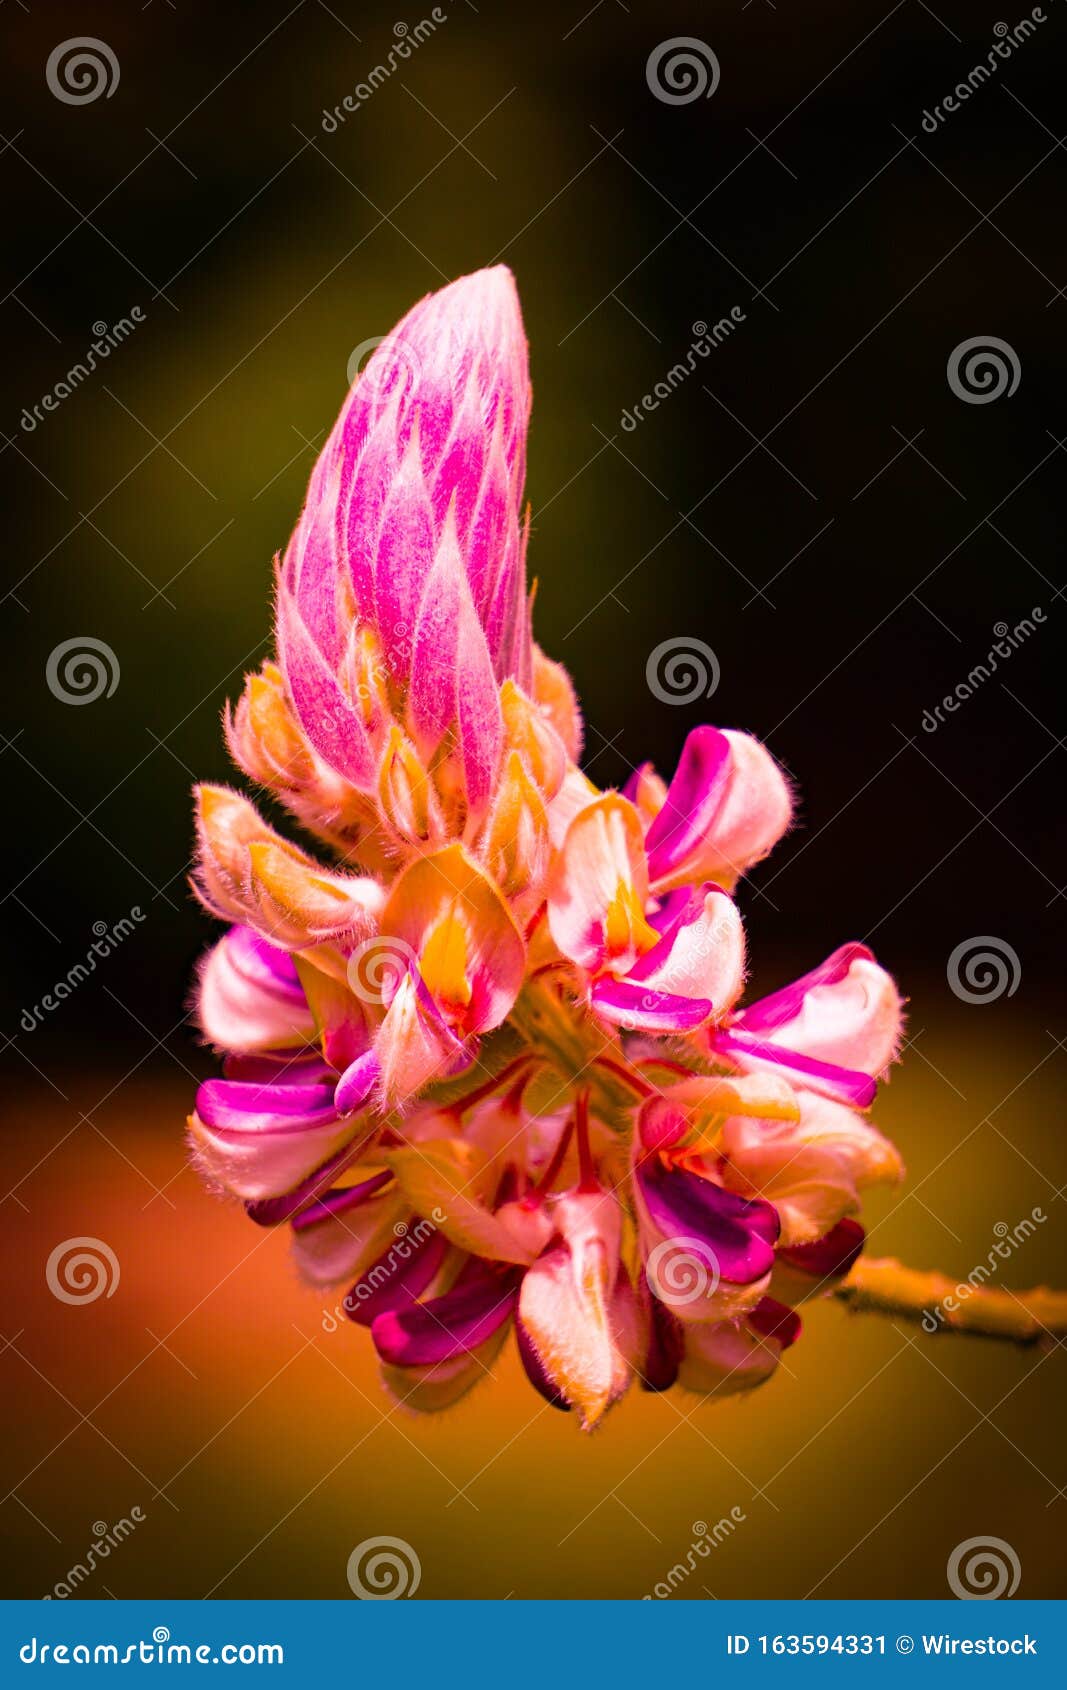 selective focus shot of a caesalpinia flower growing in malasia on blurred background